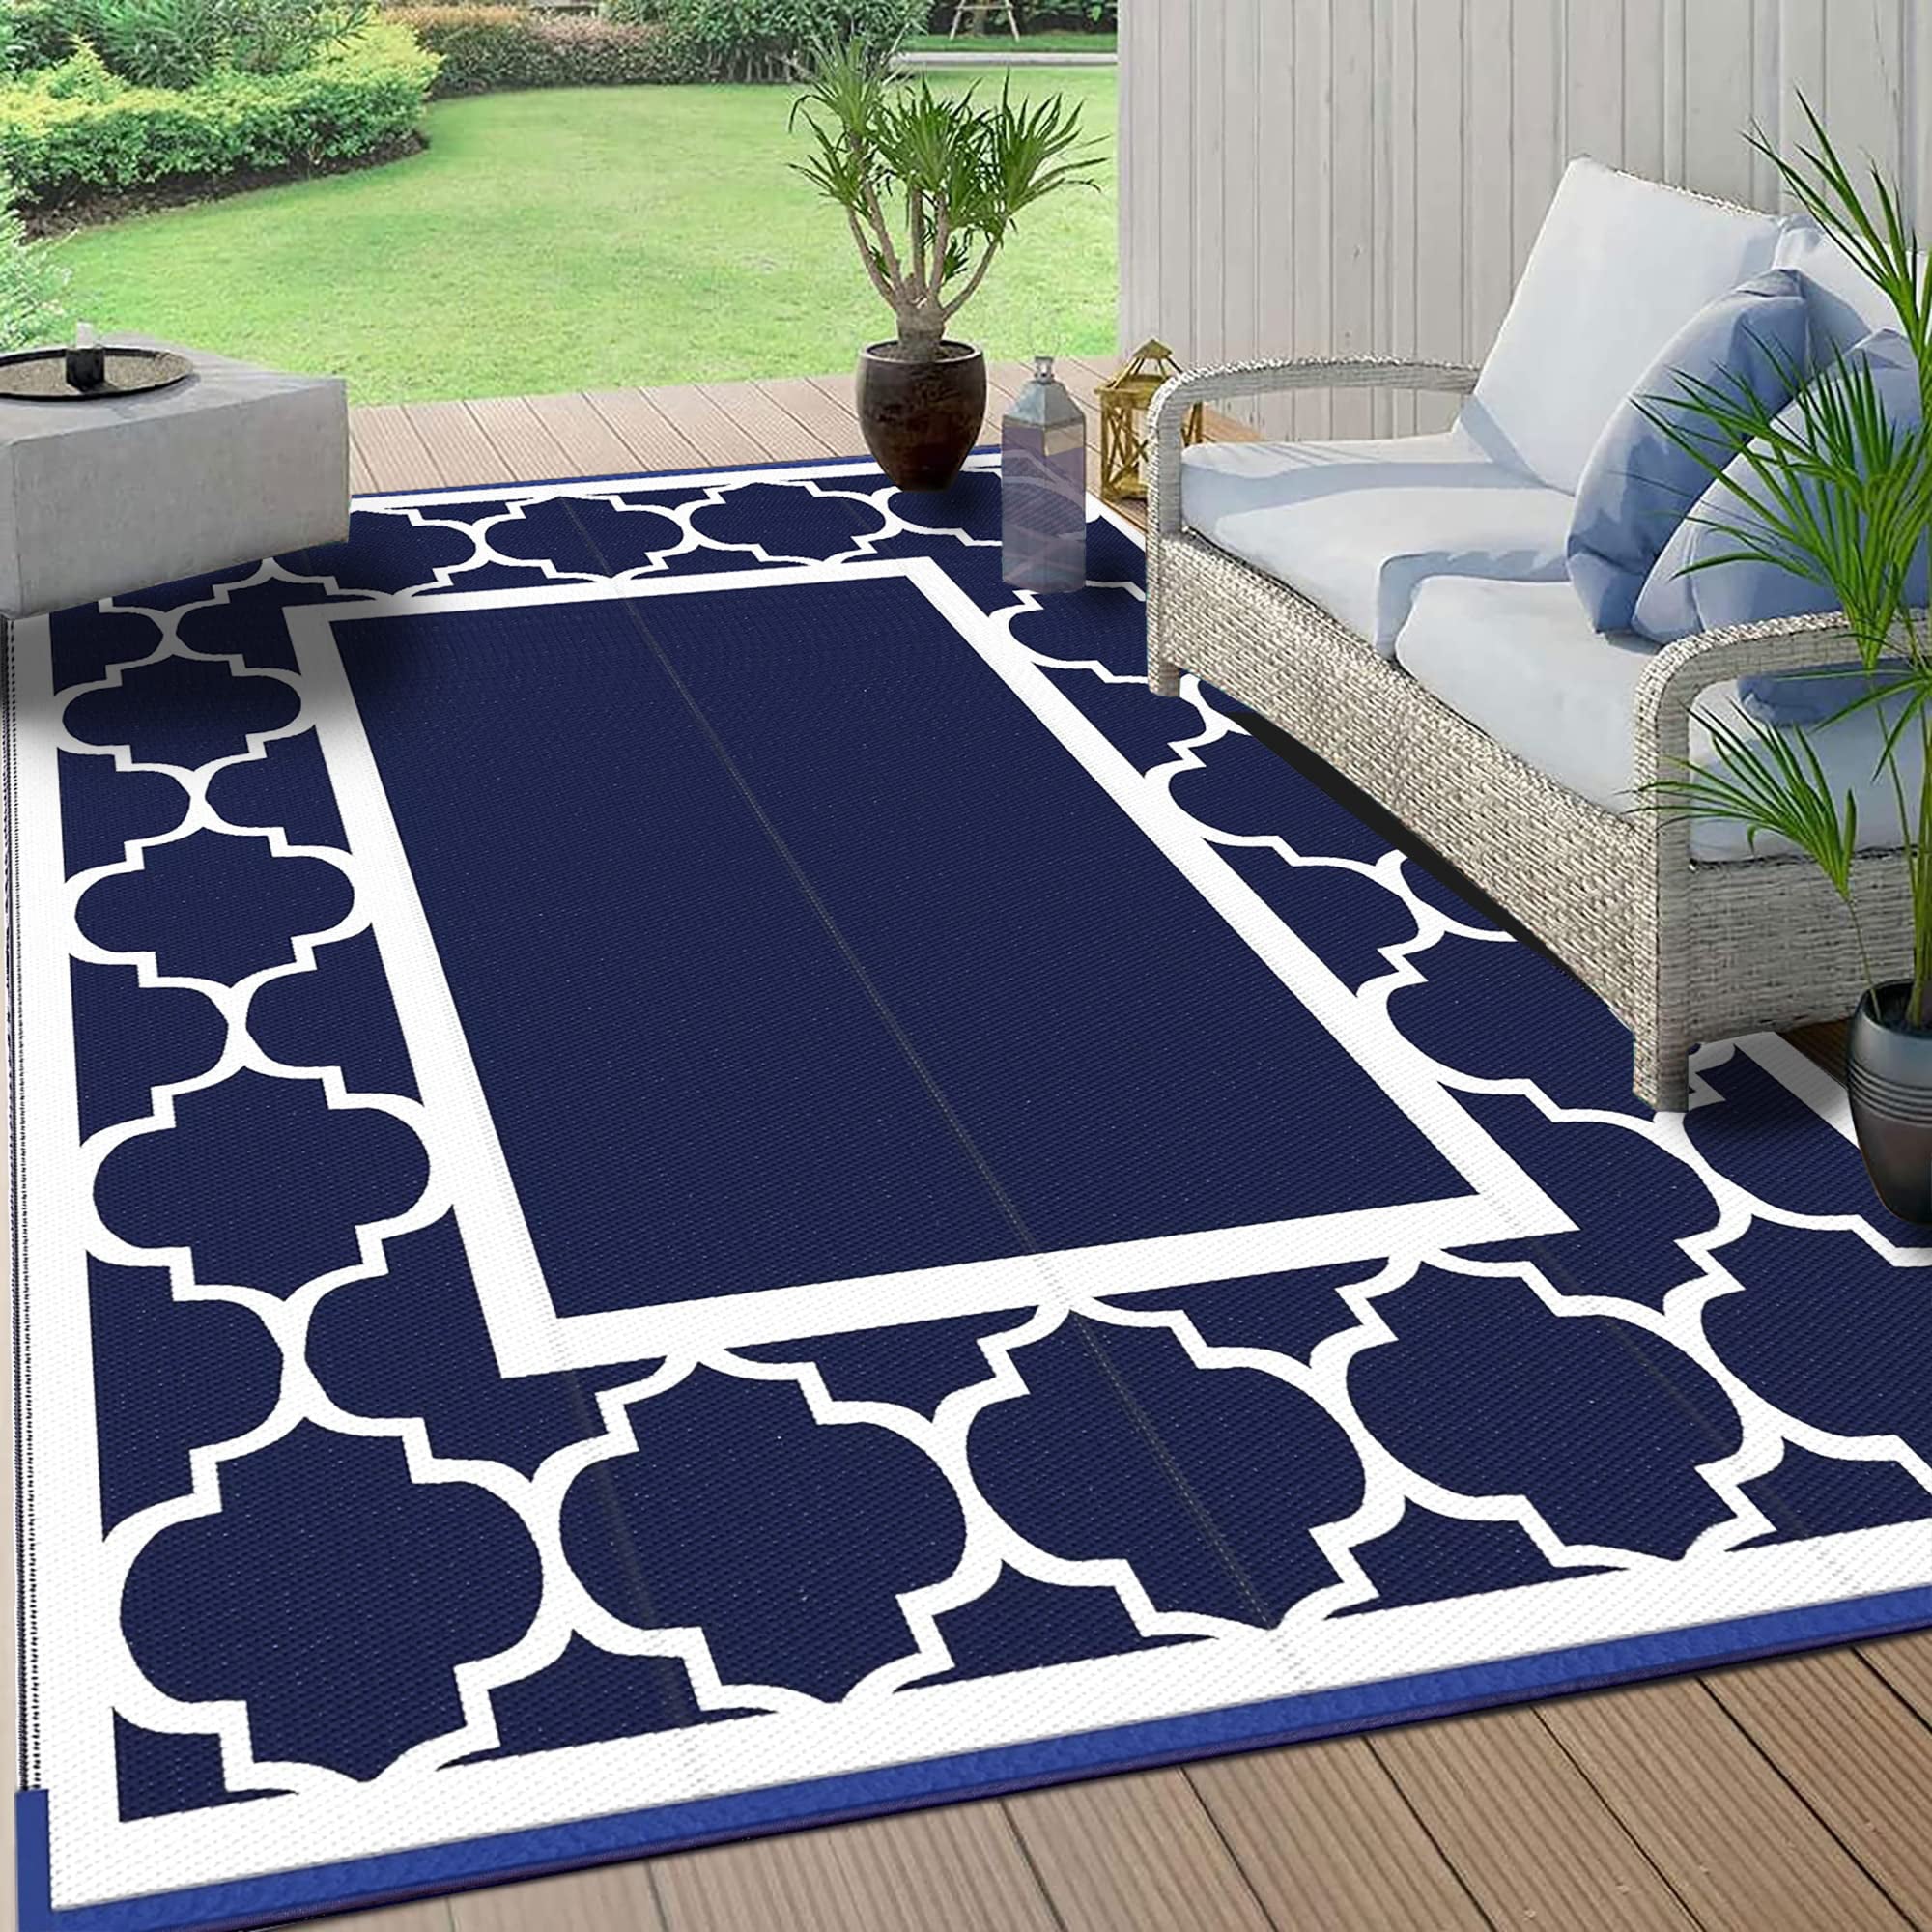 Lakeside Wilderness Outdoor Rug - 2 x 3